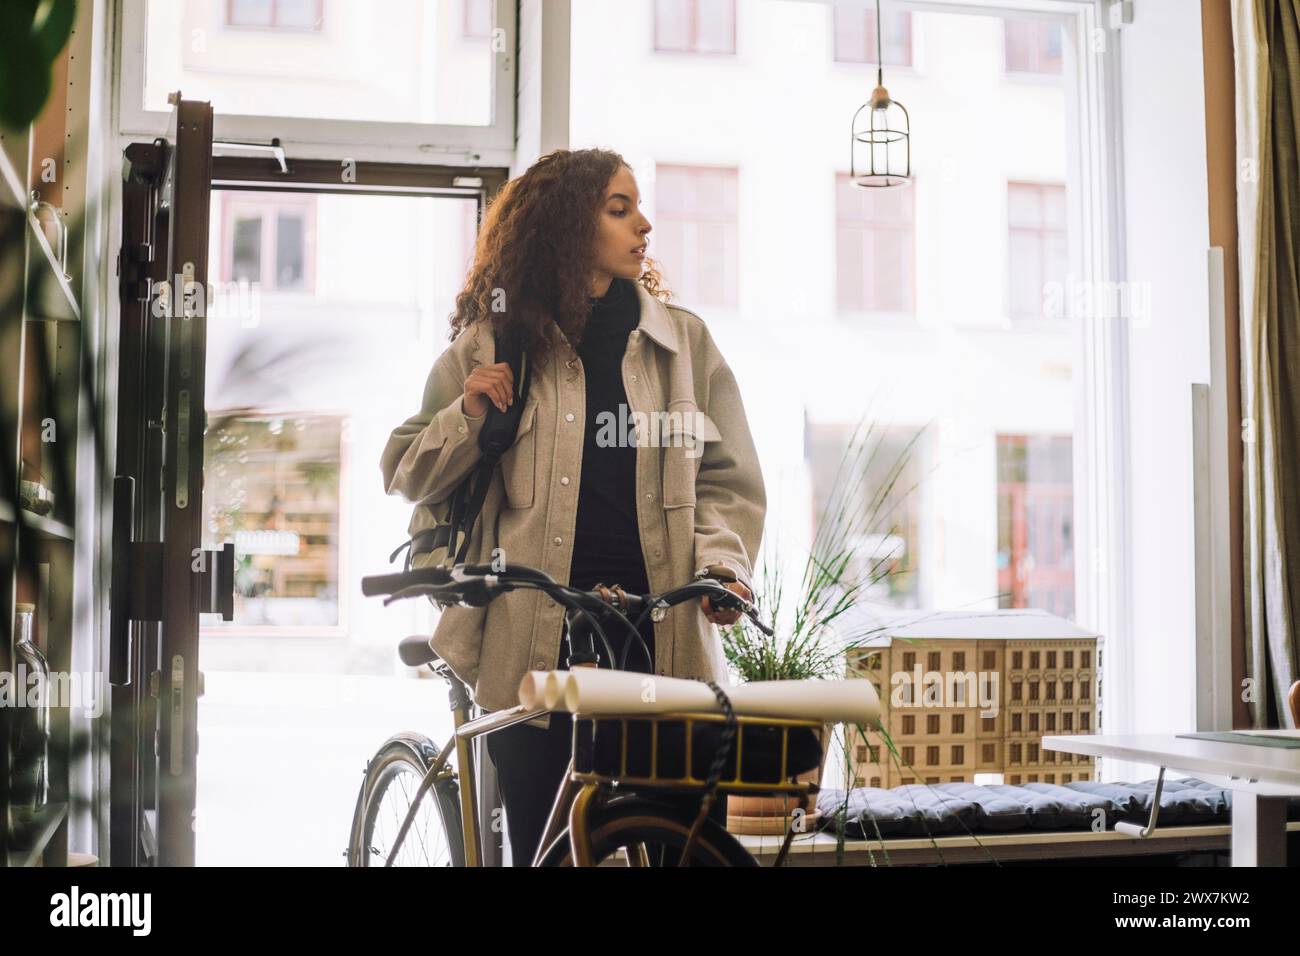 Female architect arriving at office with bicycle Stock Photo